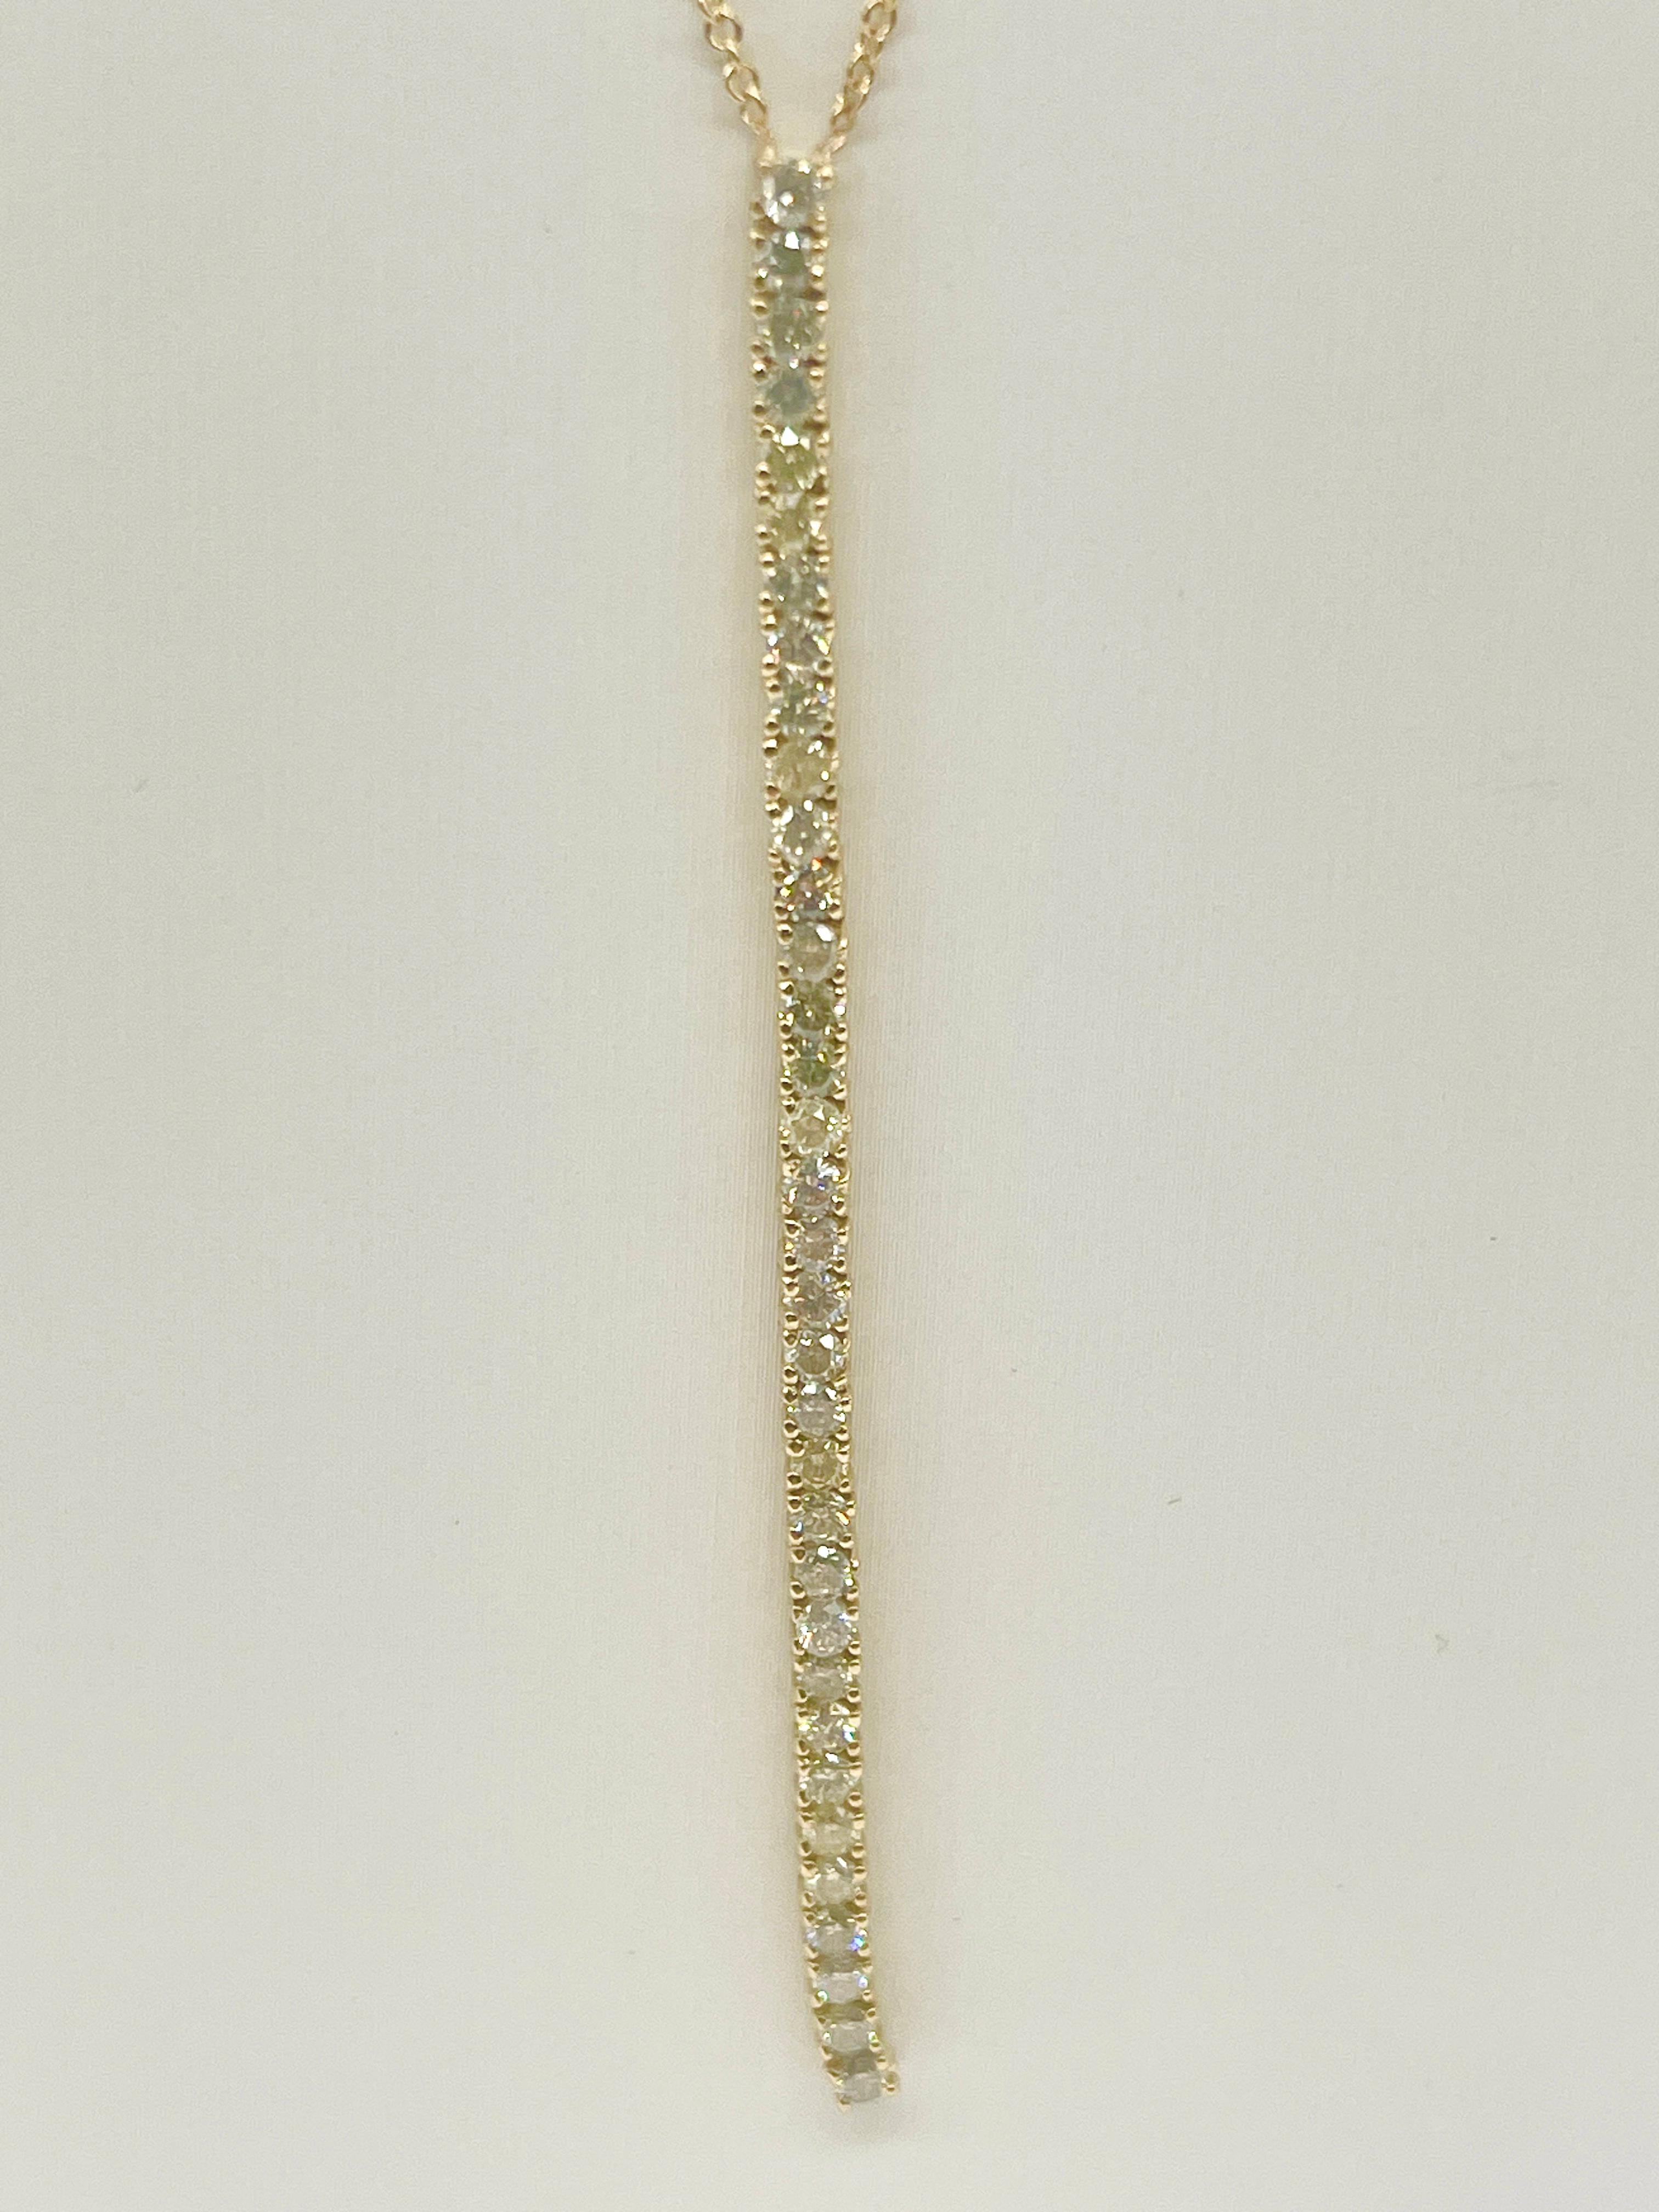 1.41 Carat All Natural Diamond Tennis Drop Necklace in 14K Yellow Gold In New Condition For Sale In Great Neck, NY